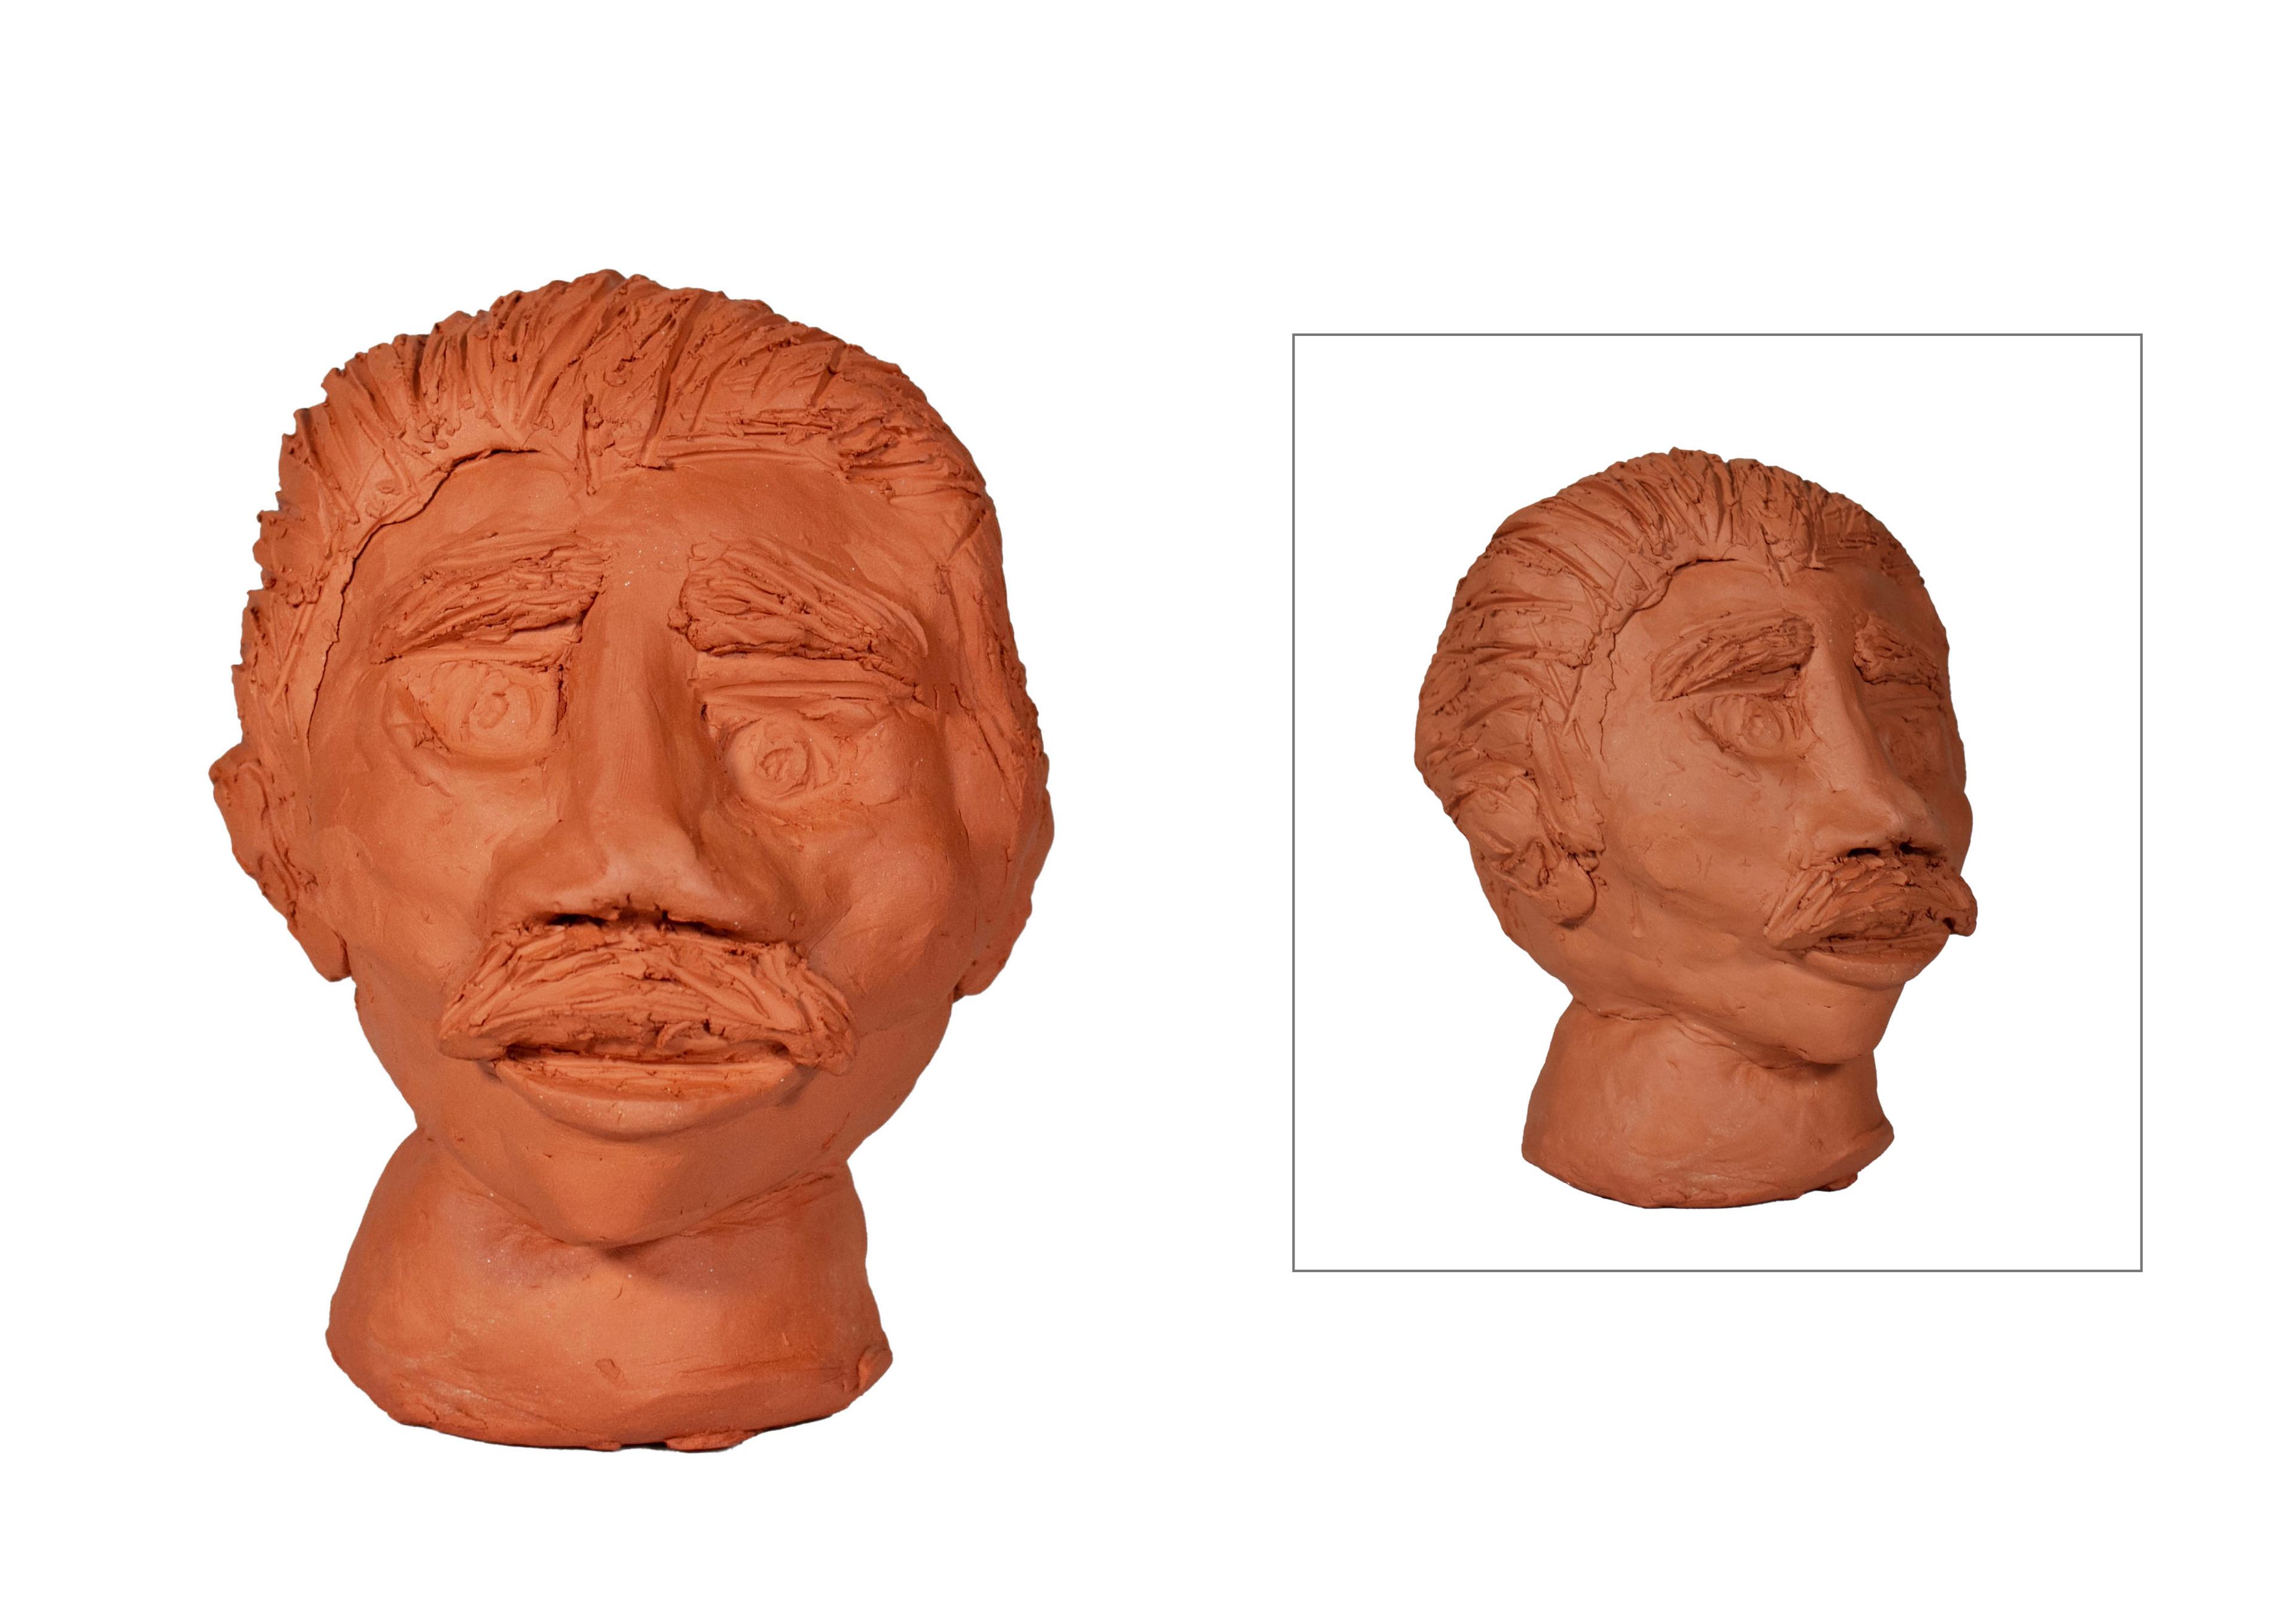 Red-clay bust of Neil deGrasse Tyson presented in two photos, one at left facing the viewer directly, the other at right facing to the right. Tyson's short curly hair and thick mustache are prominent.